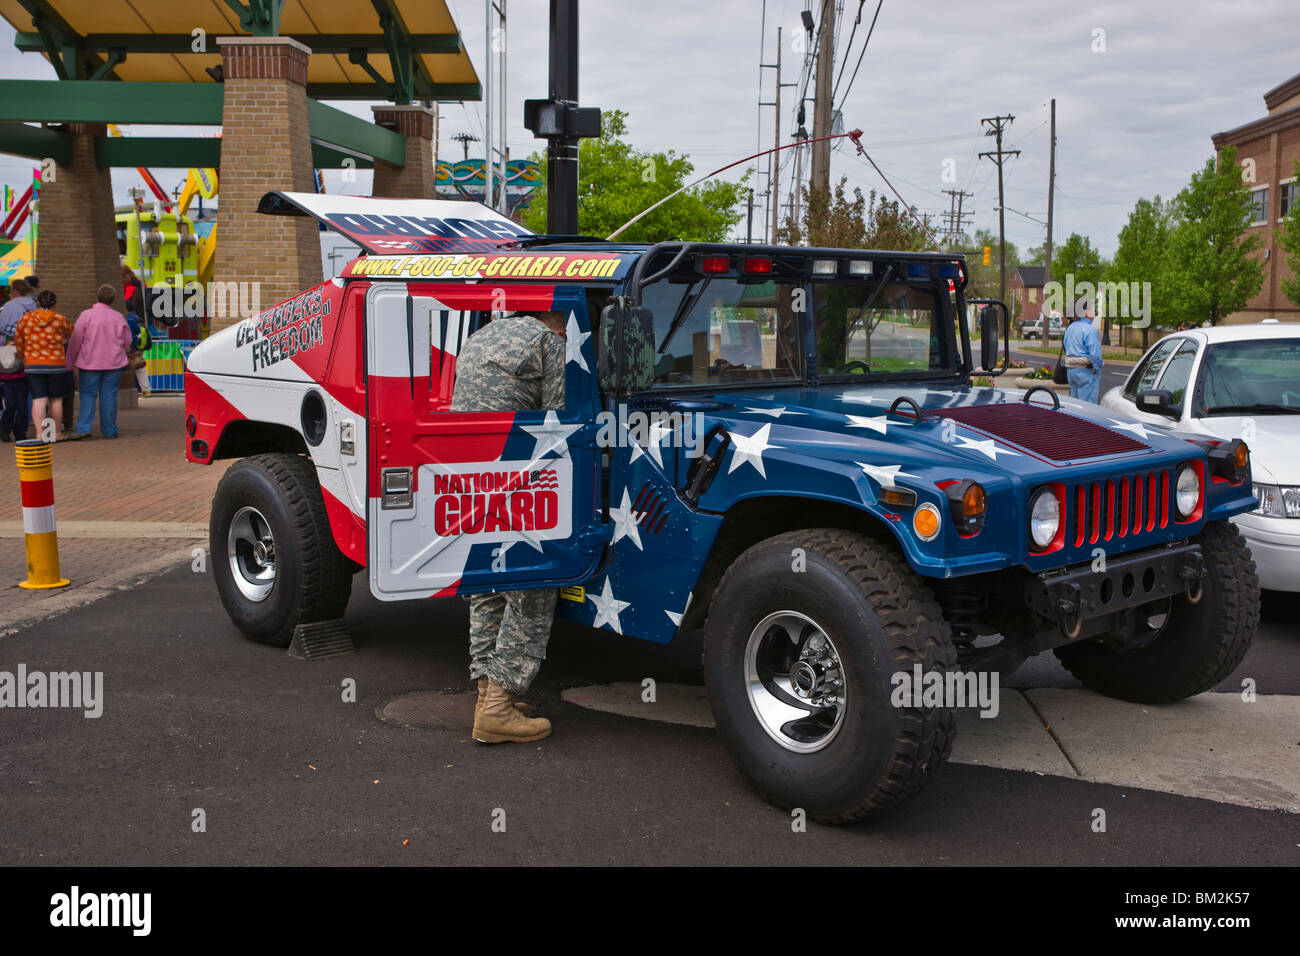 National Guard hummer custom painted with American Flag stars and stripes on a street in Holland Michigan USA Stock Photo